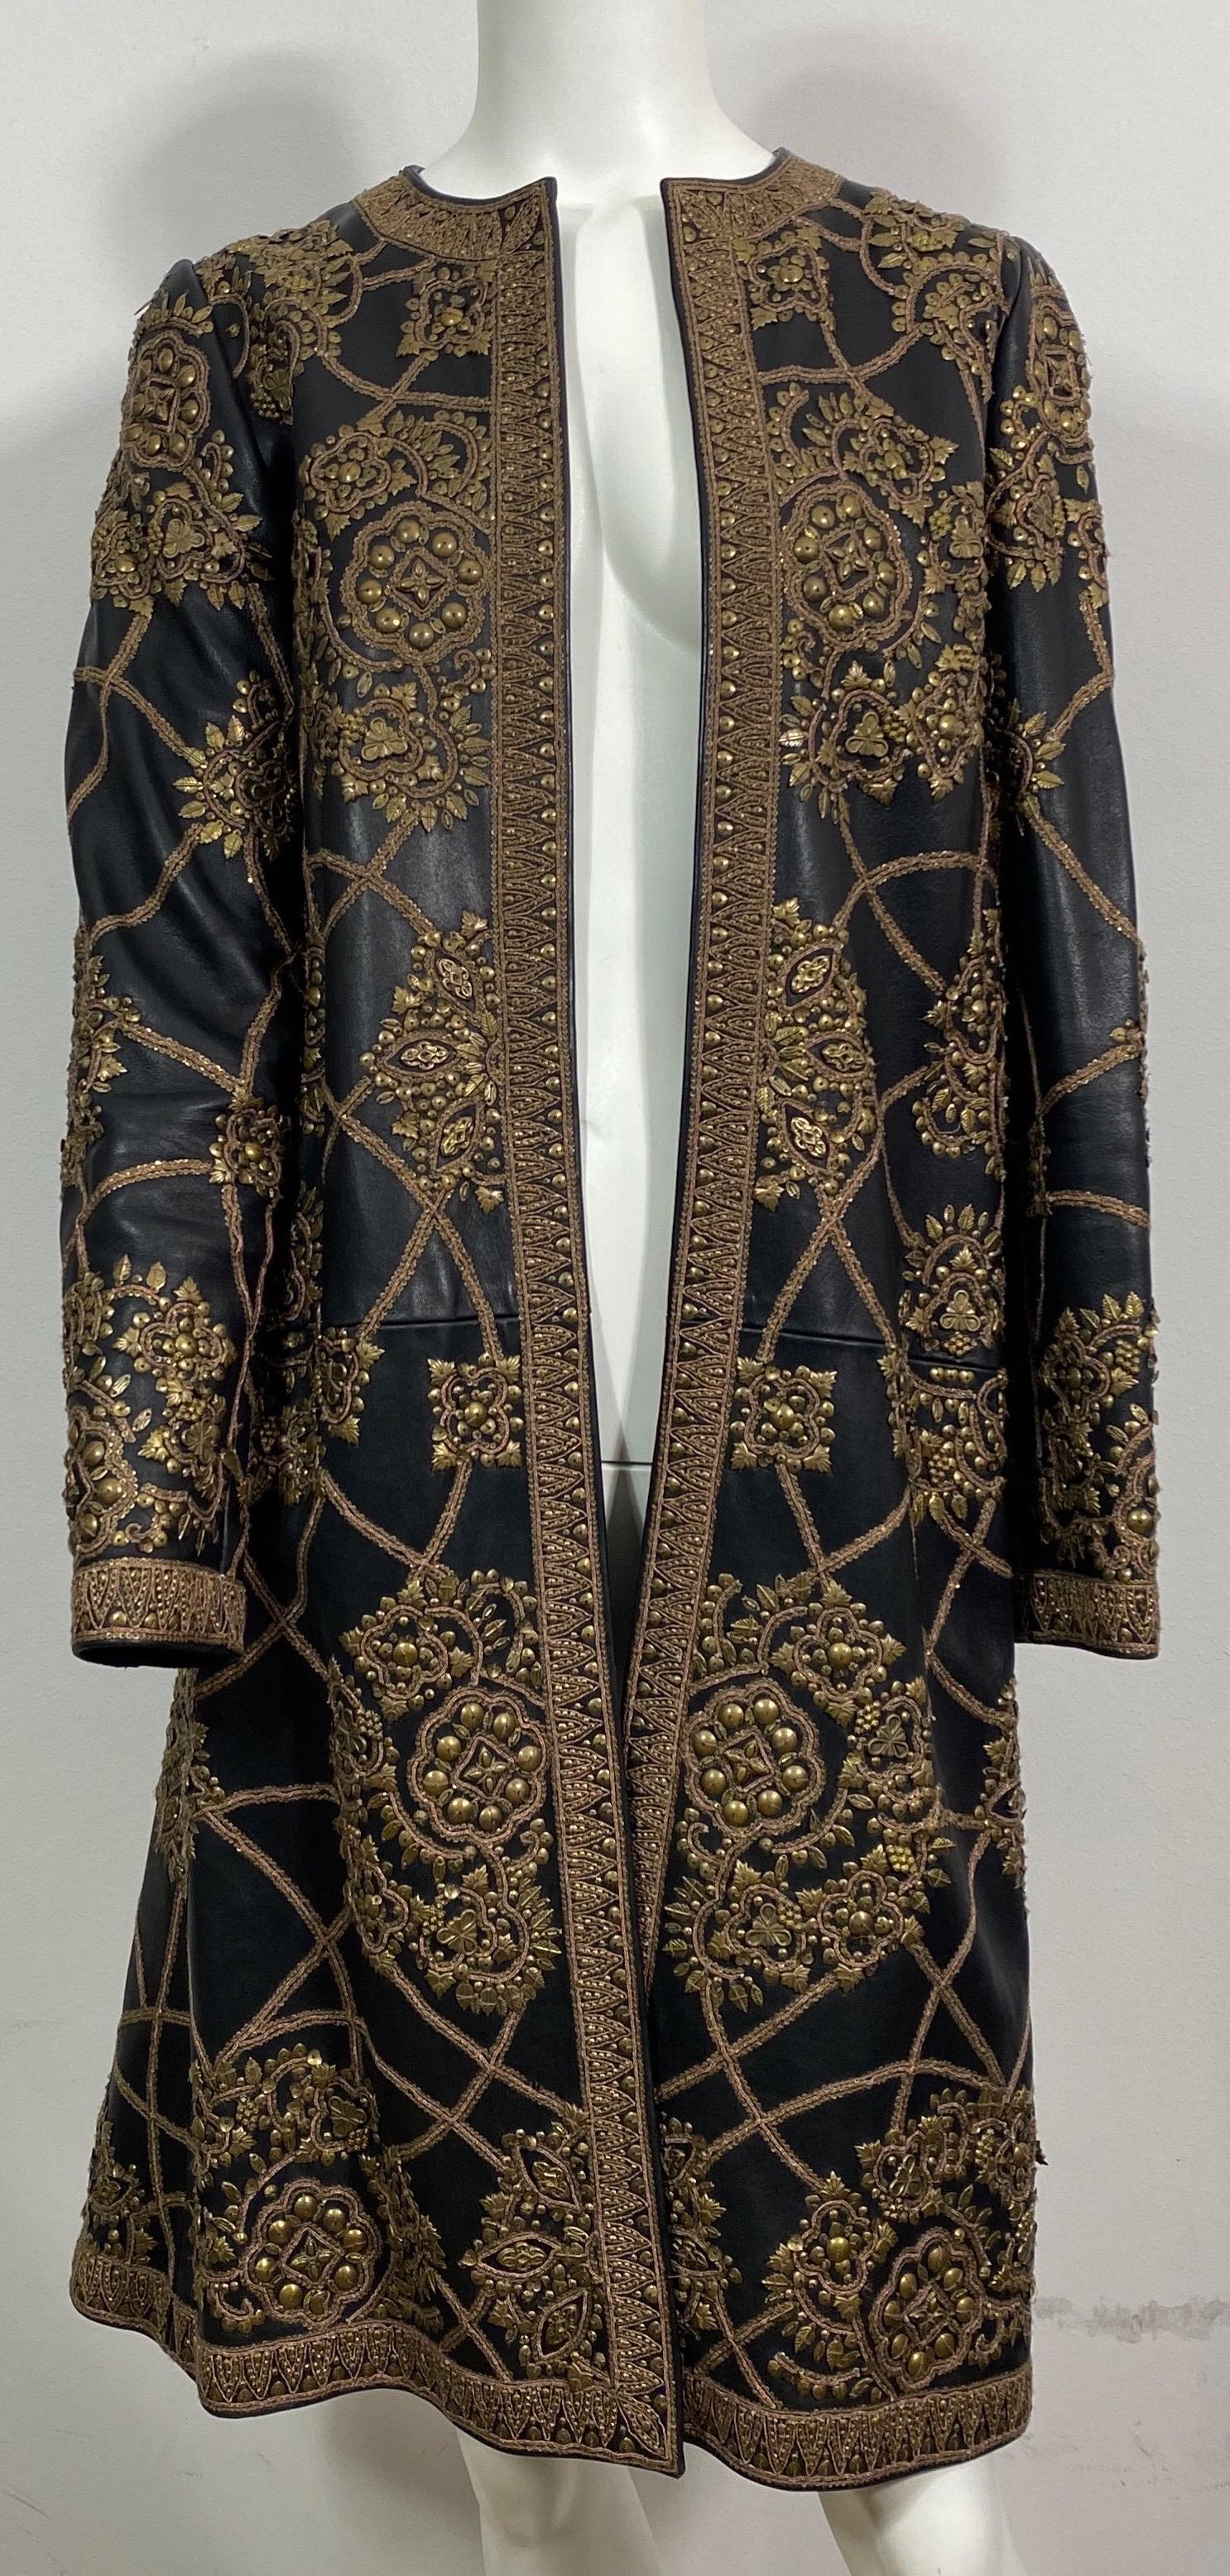 Oscar de la Renta Black Lambskin Leather Embellished Coat-Fall 2006-Size 2 This fully lined coat is made of a black soft lambskin leather and is Heavily embellished with antique copper mini sequence, ornaments of different shapes and copper cording